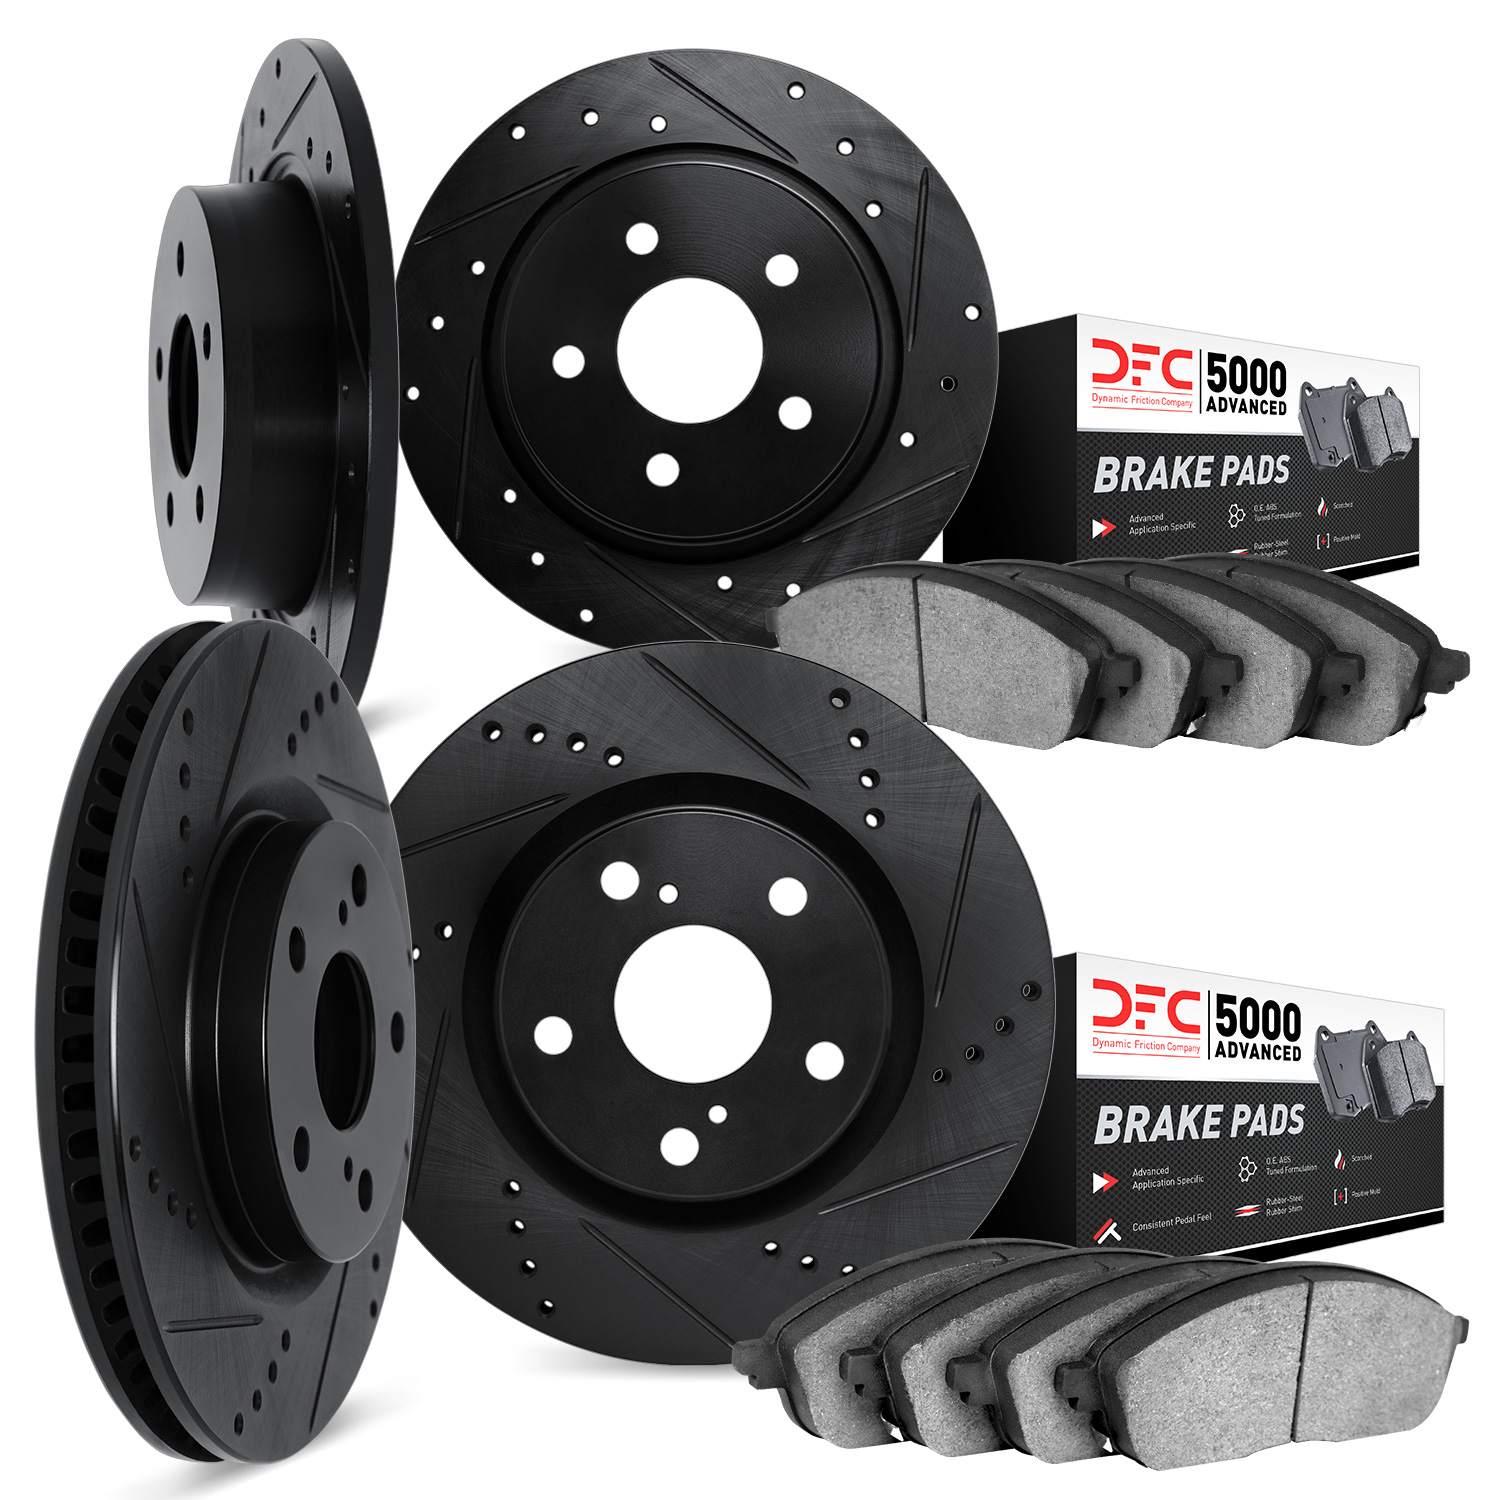 8504-59049 Drilled/Slotted Brake Rotors w/5000 Advanced Brake Pads Kit [Black], 2002-2004 Acura/Honda, Position: Front and Rear